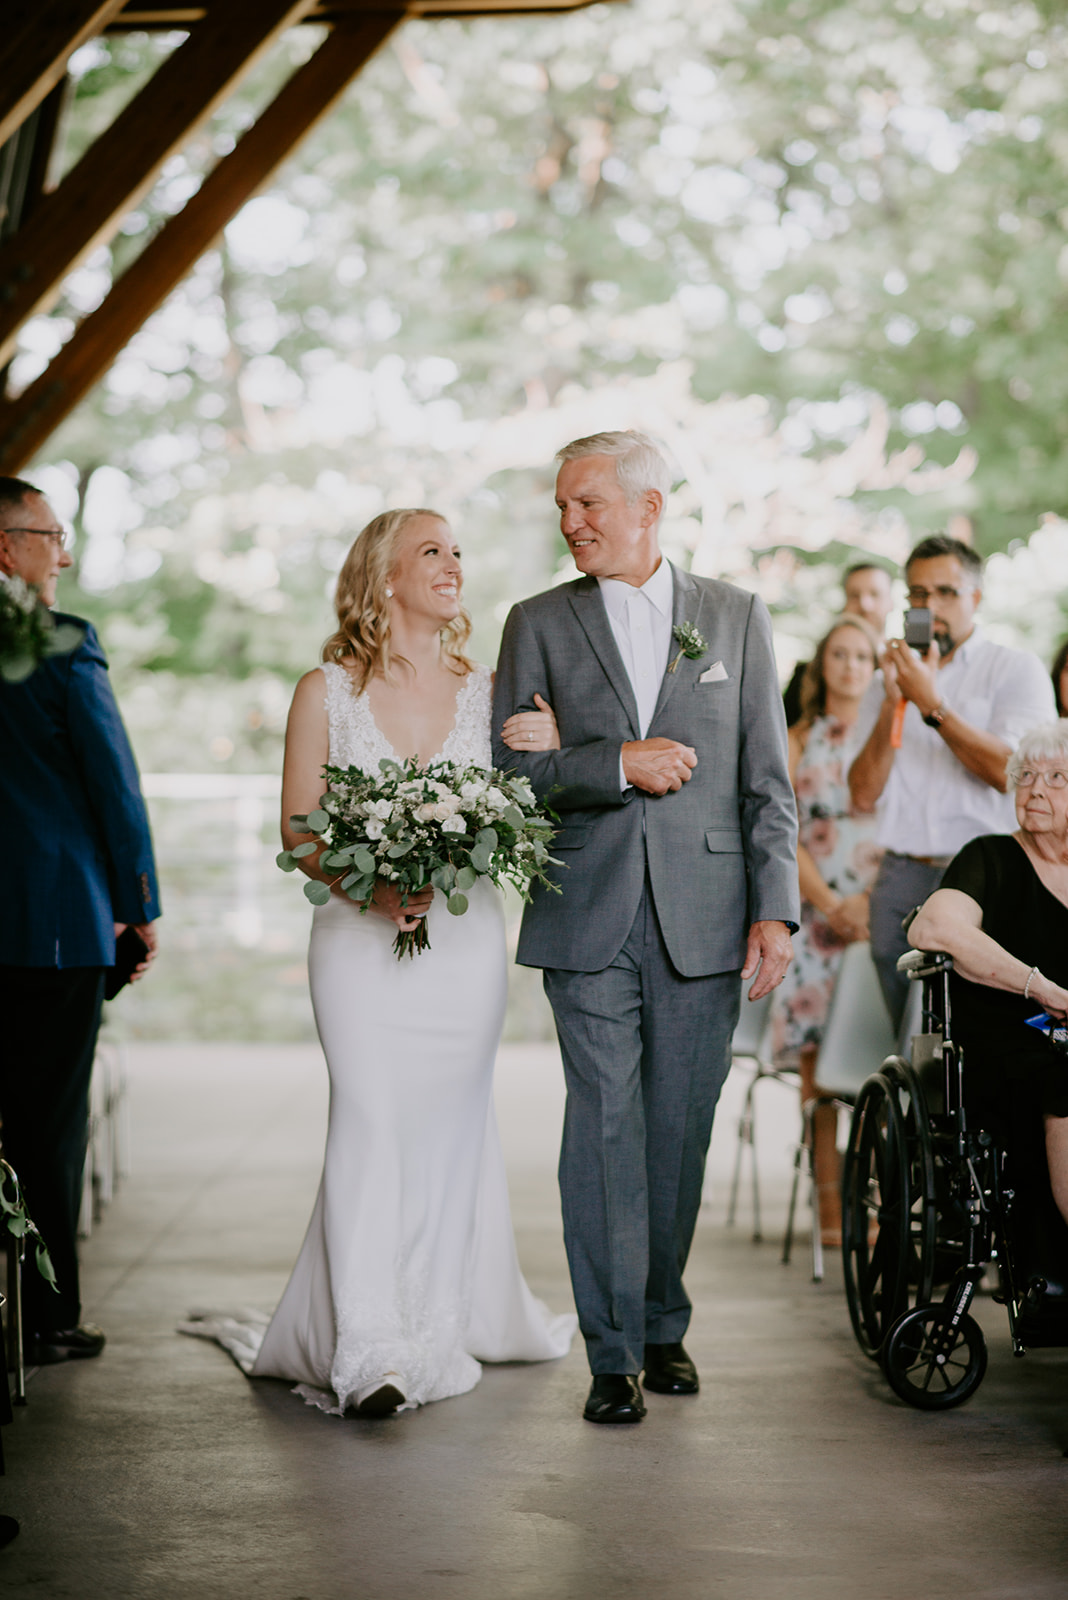 grand rapids wedding photographer liv lyszyk photography fall wedding at bissell treehouse